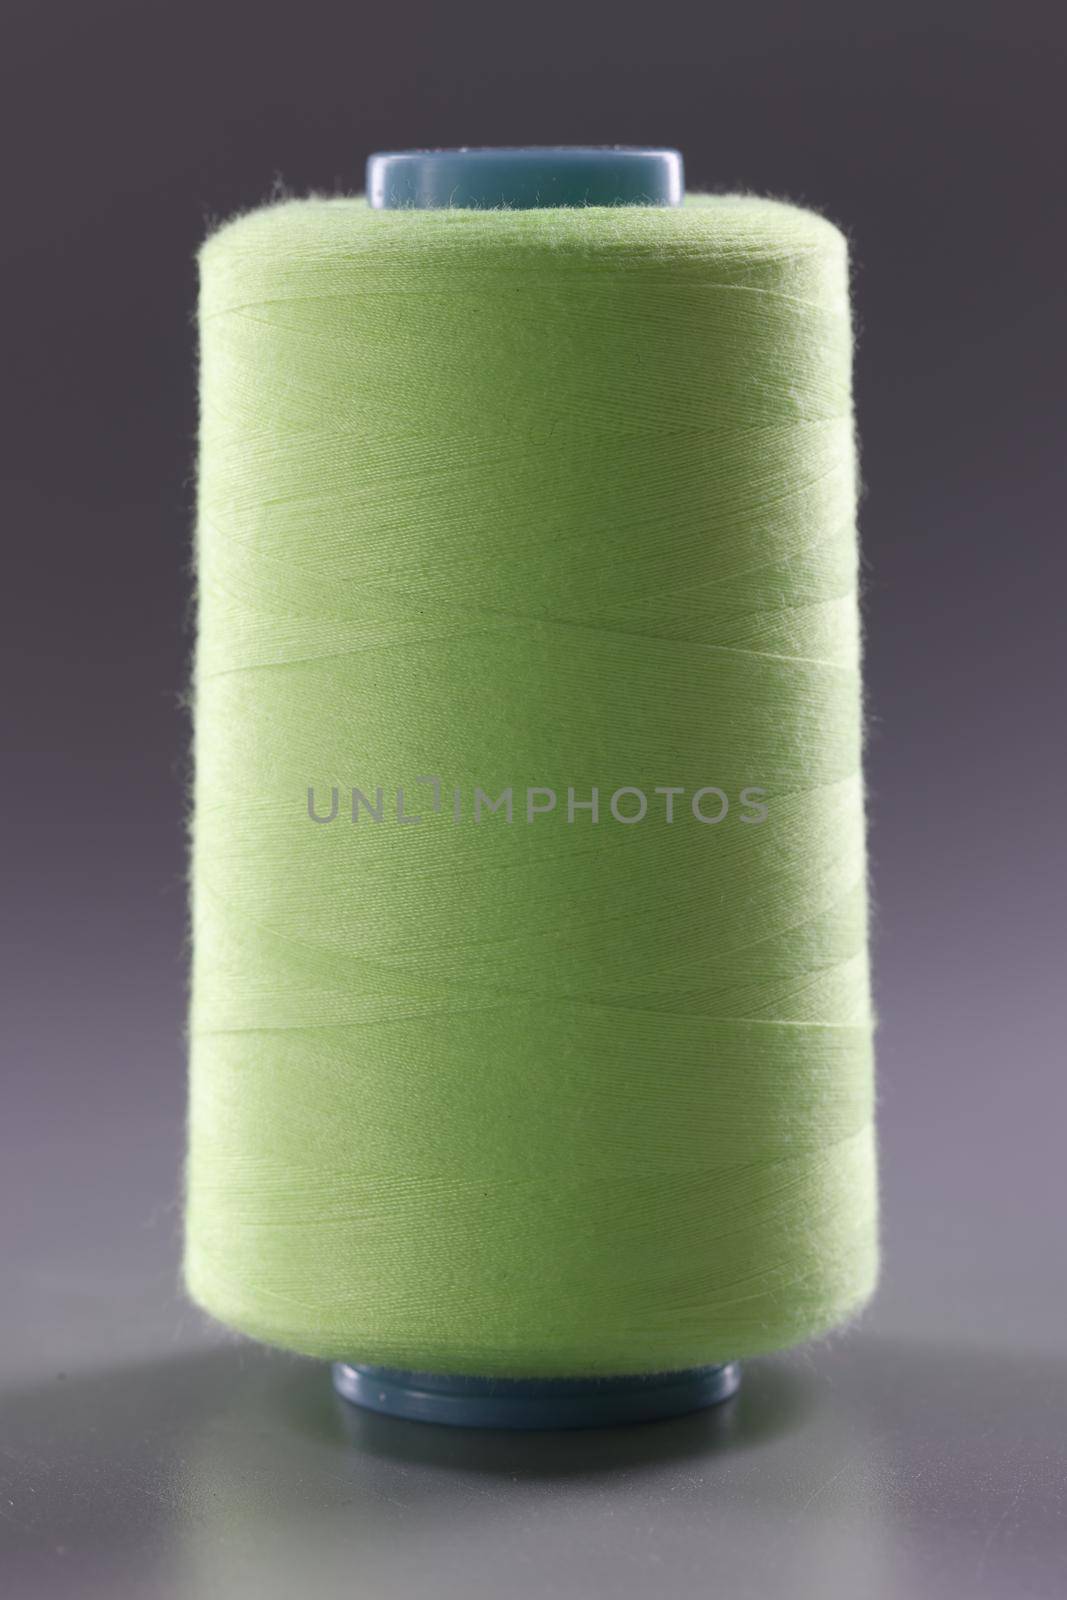 Light green spool of thread on gray background. Sewing machine materials and high-quality durable threads